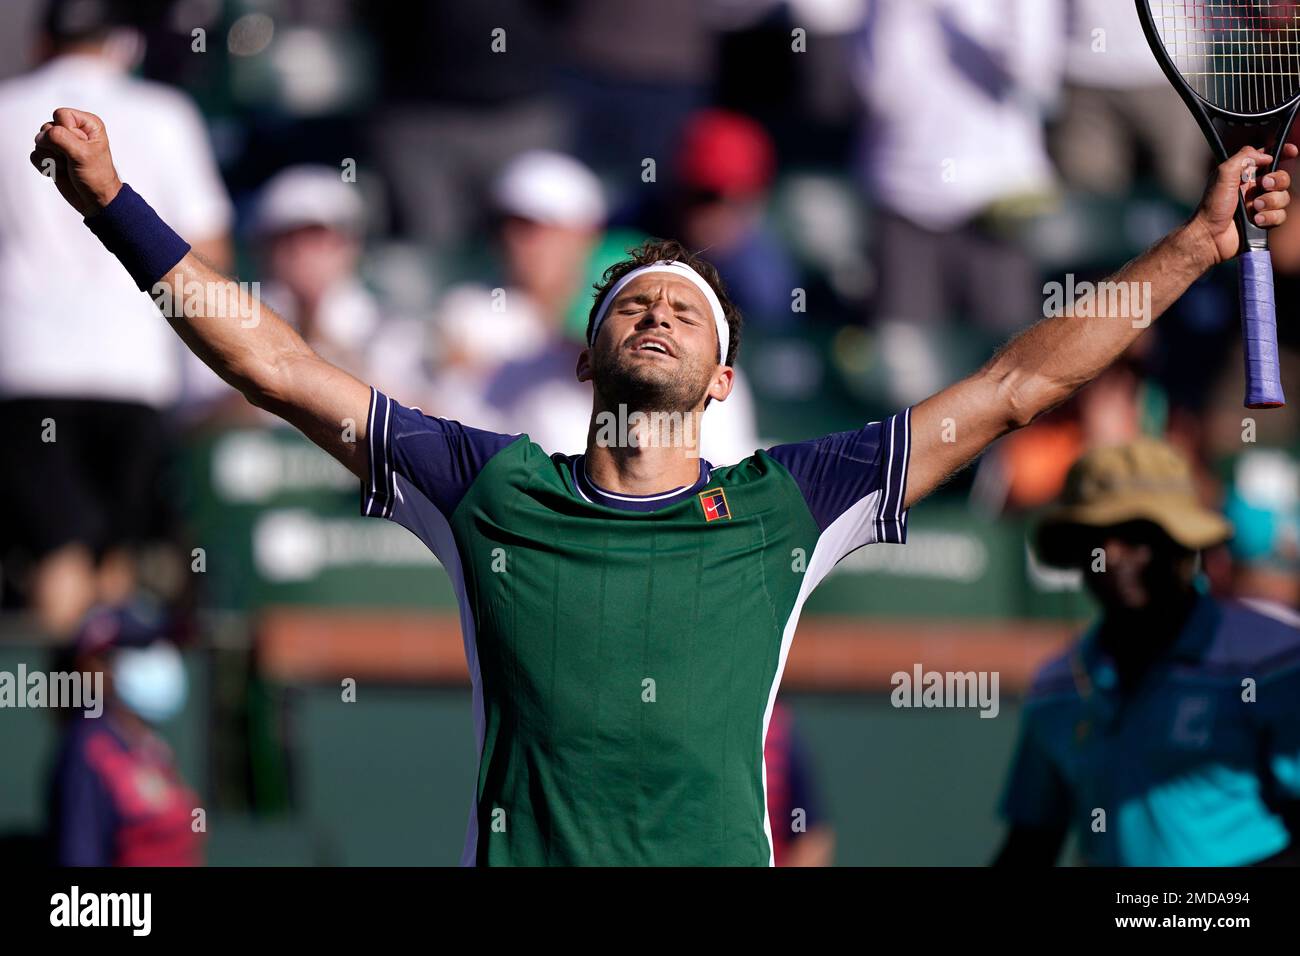 Grigor Dimitrov, of Bulgaria, reacts after beating Hubert Hurkacz, of Poland, at the BNP Paribas Open tennis tournament Thursday, Oct. 14, 2021, in Indian Wells, Calif